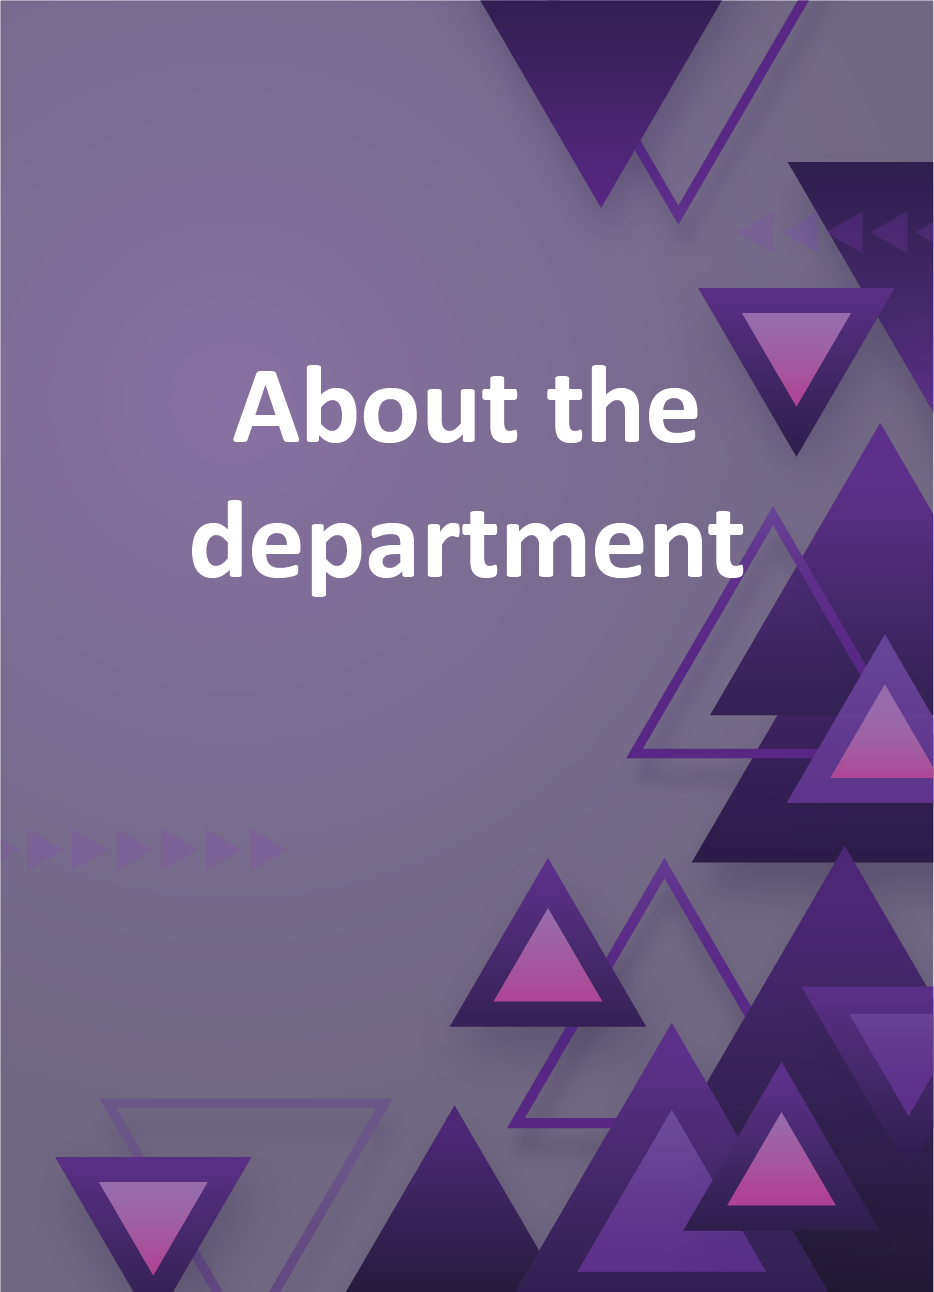 About the department